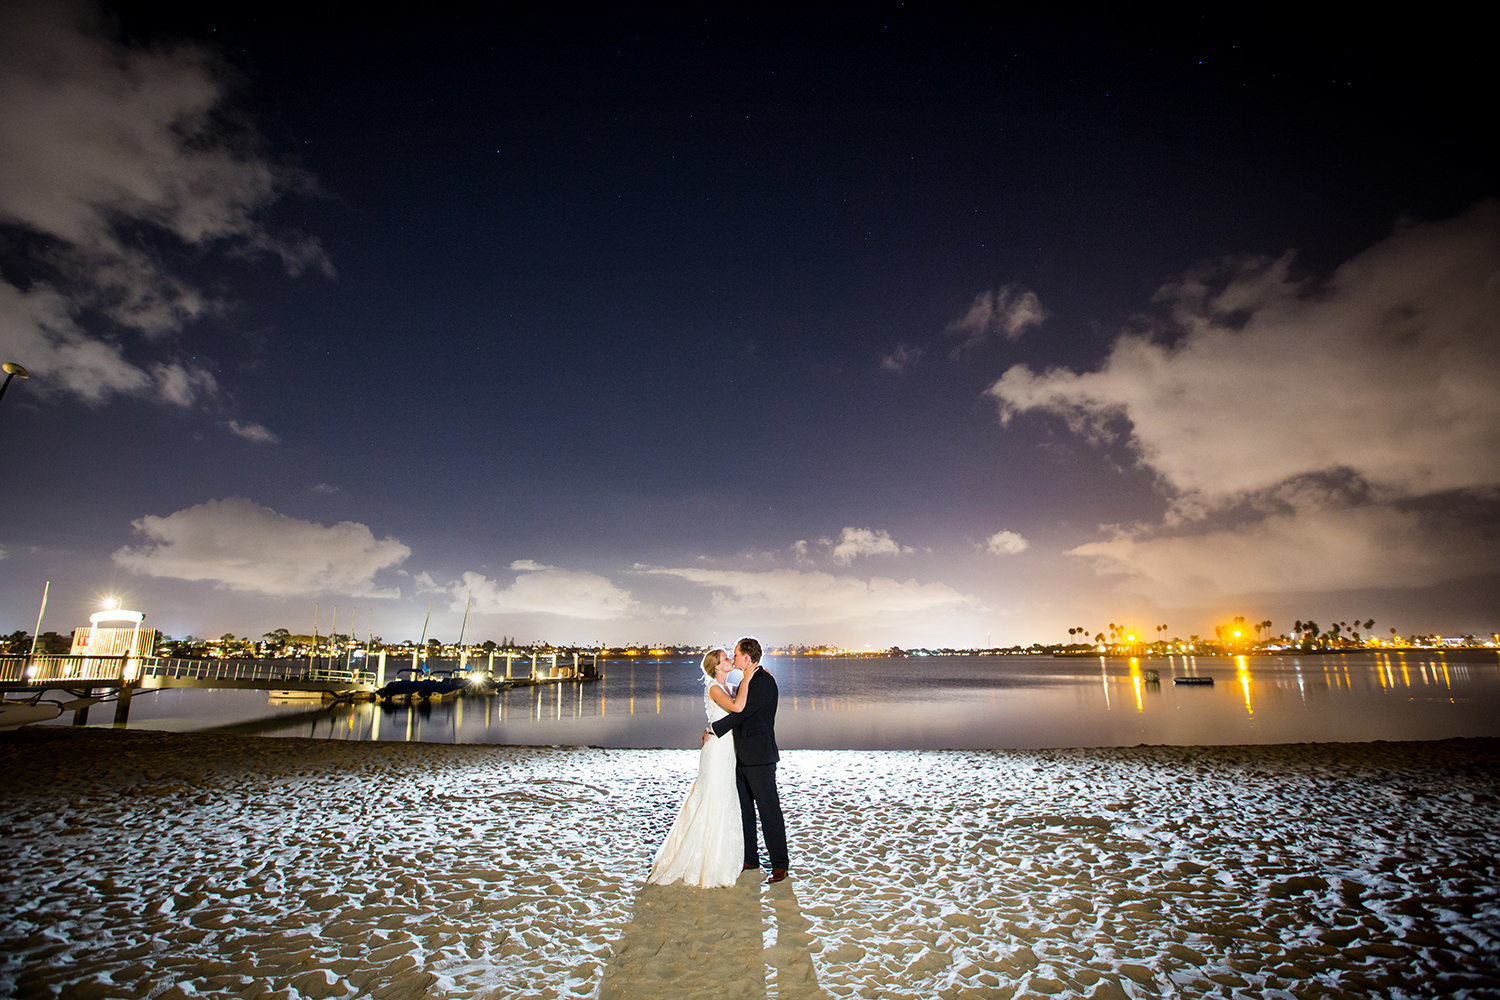 night image of bride and groom and bay in background